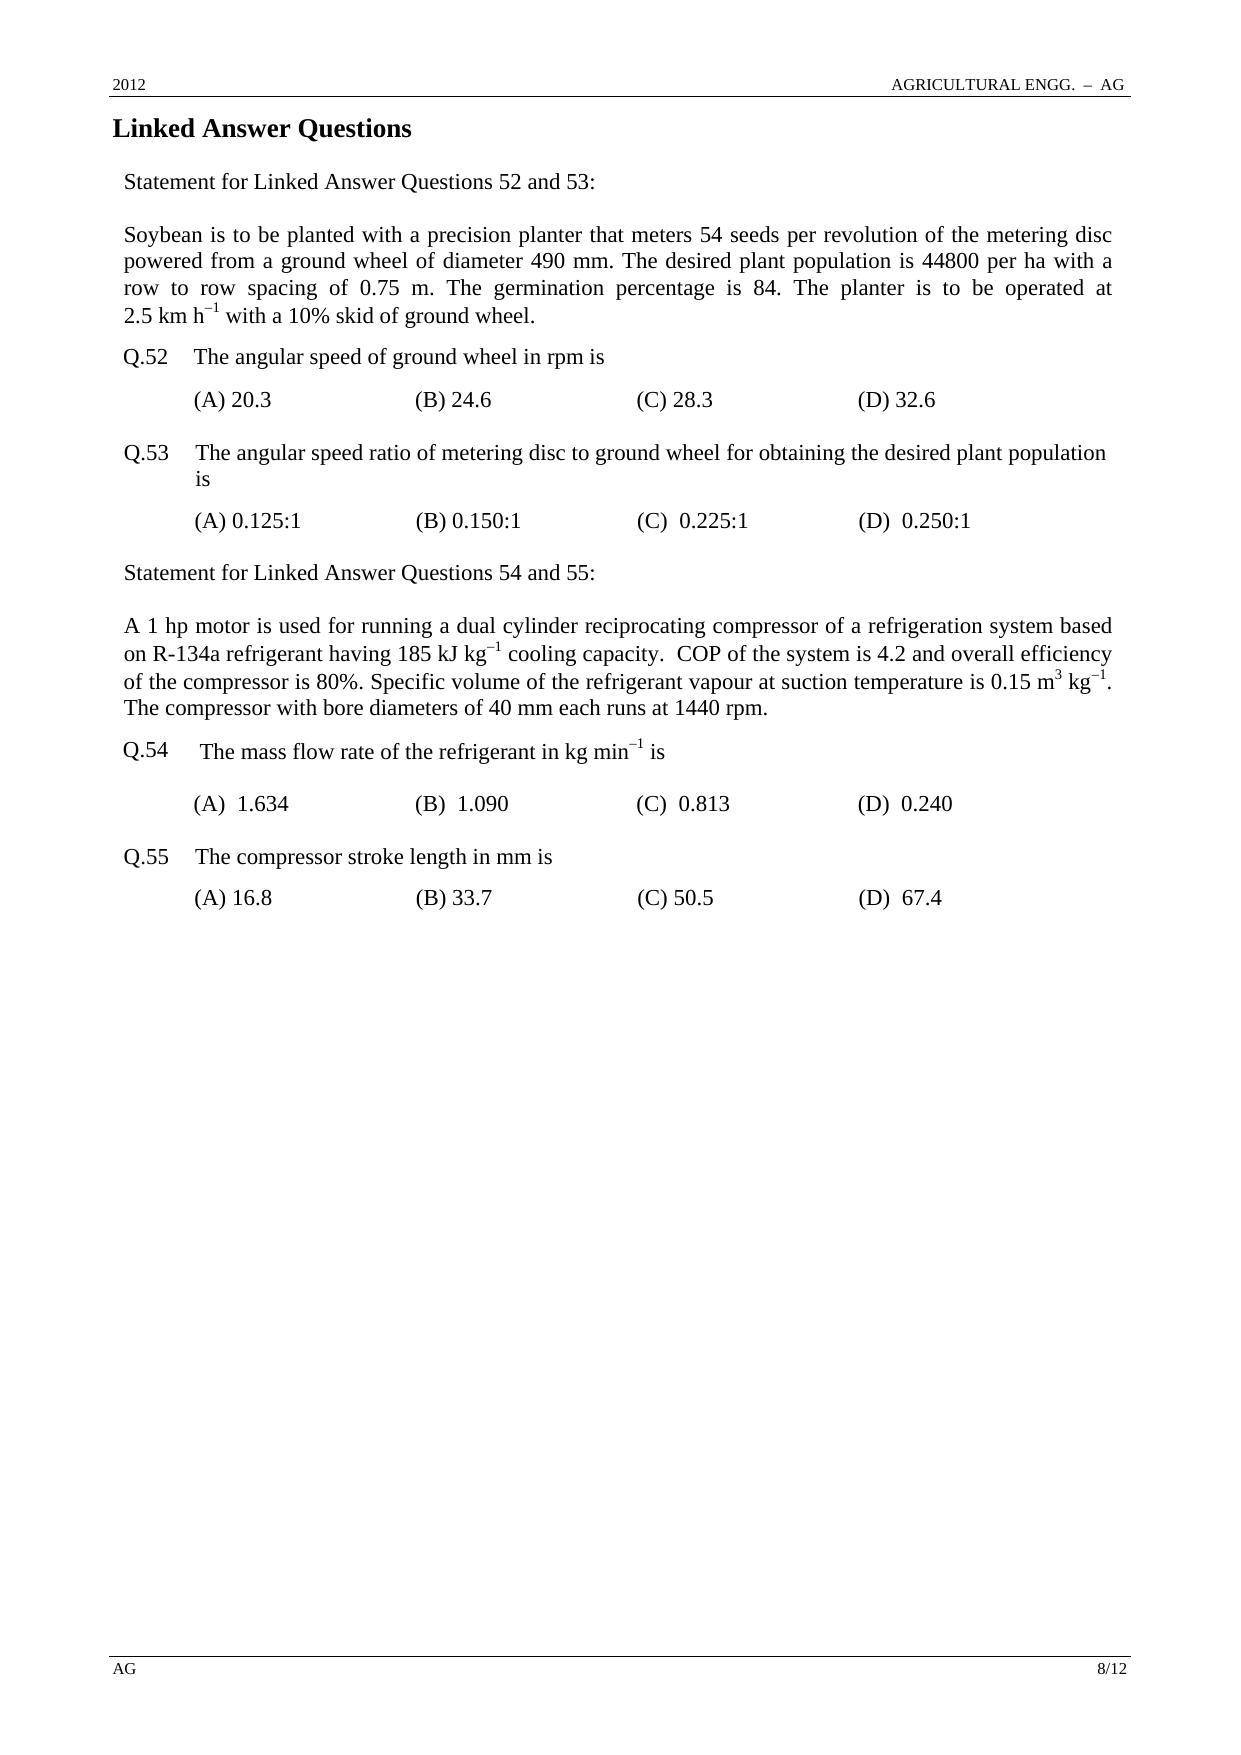 GATE 2012 Agricultural Engineering (AG) Question Paper with Answer Key - Page 8